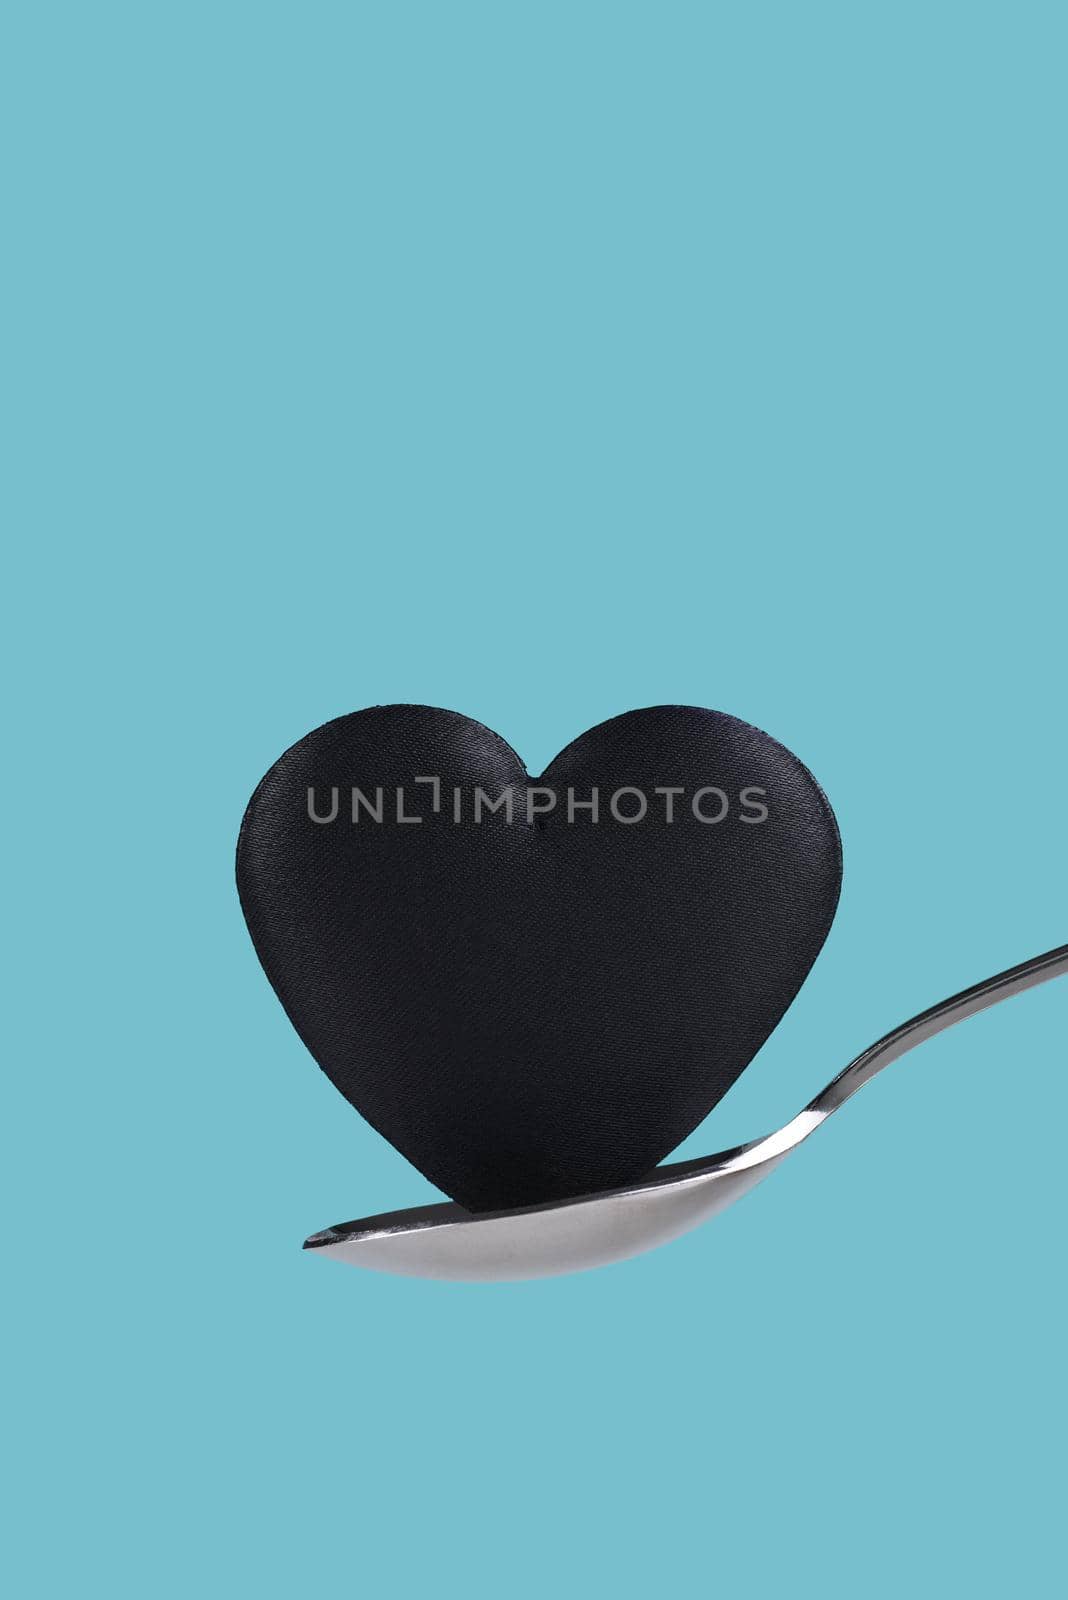 Black heart balanced on a spoon over a teal background by sCukrov